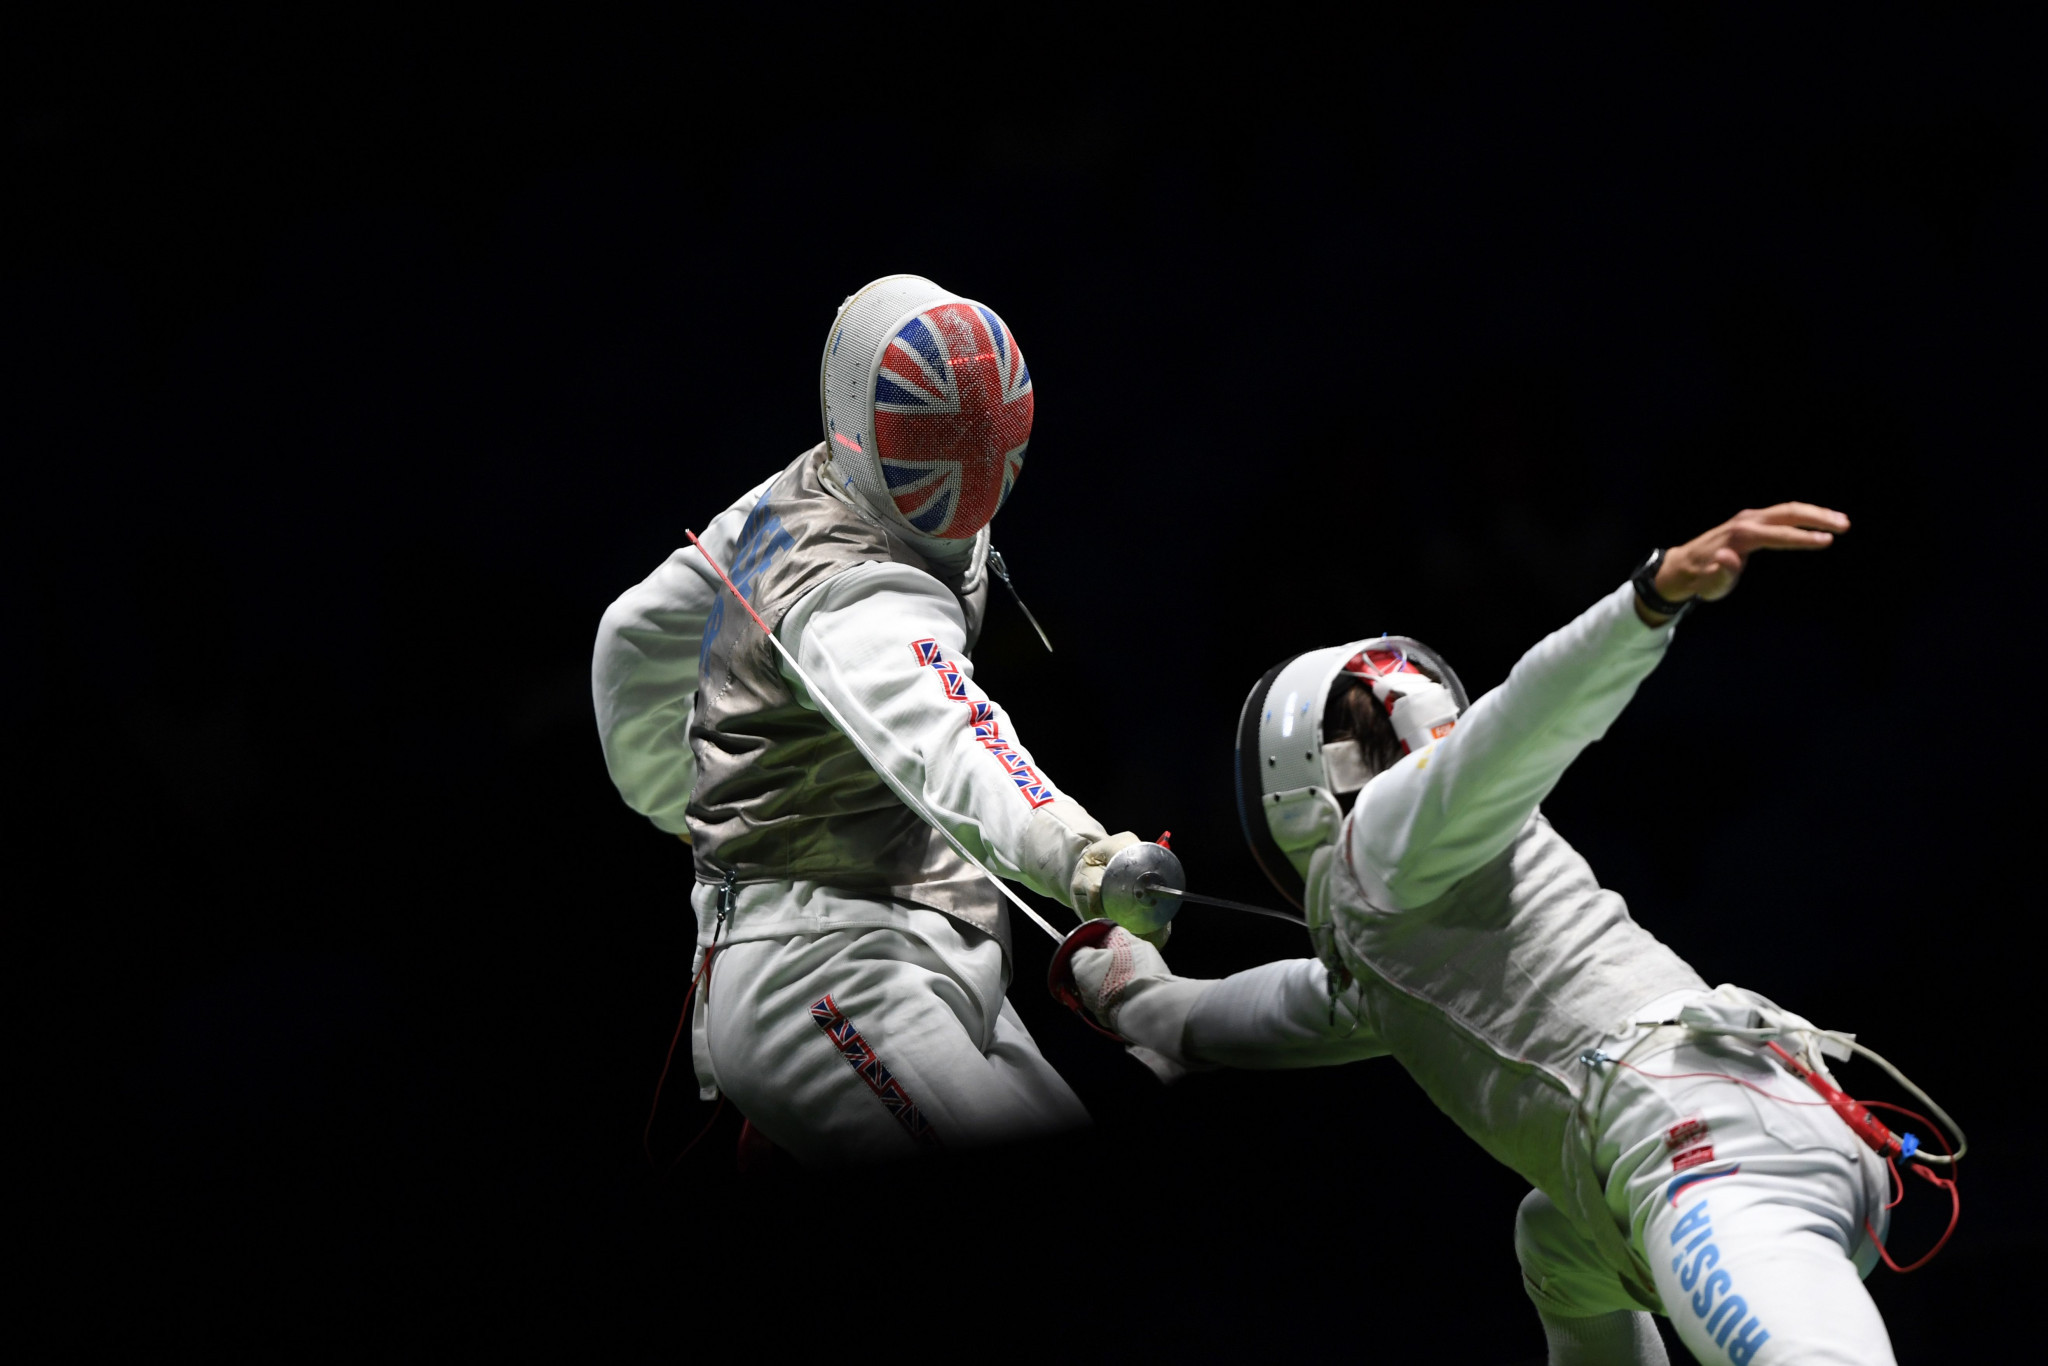 Will Germany has helped to develop the sport of fencing at his university ©Getty Images